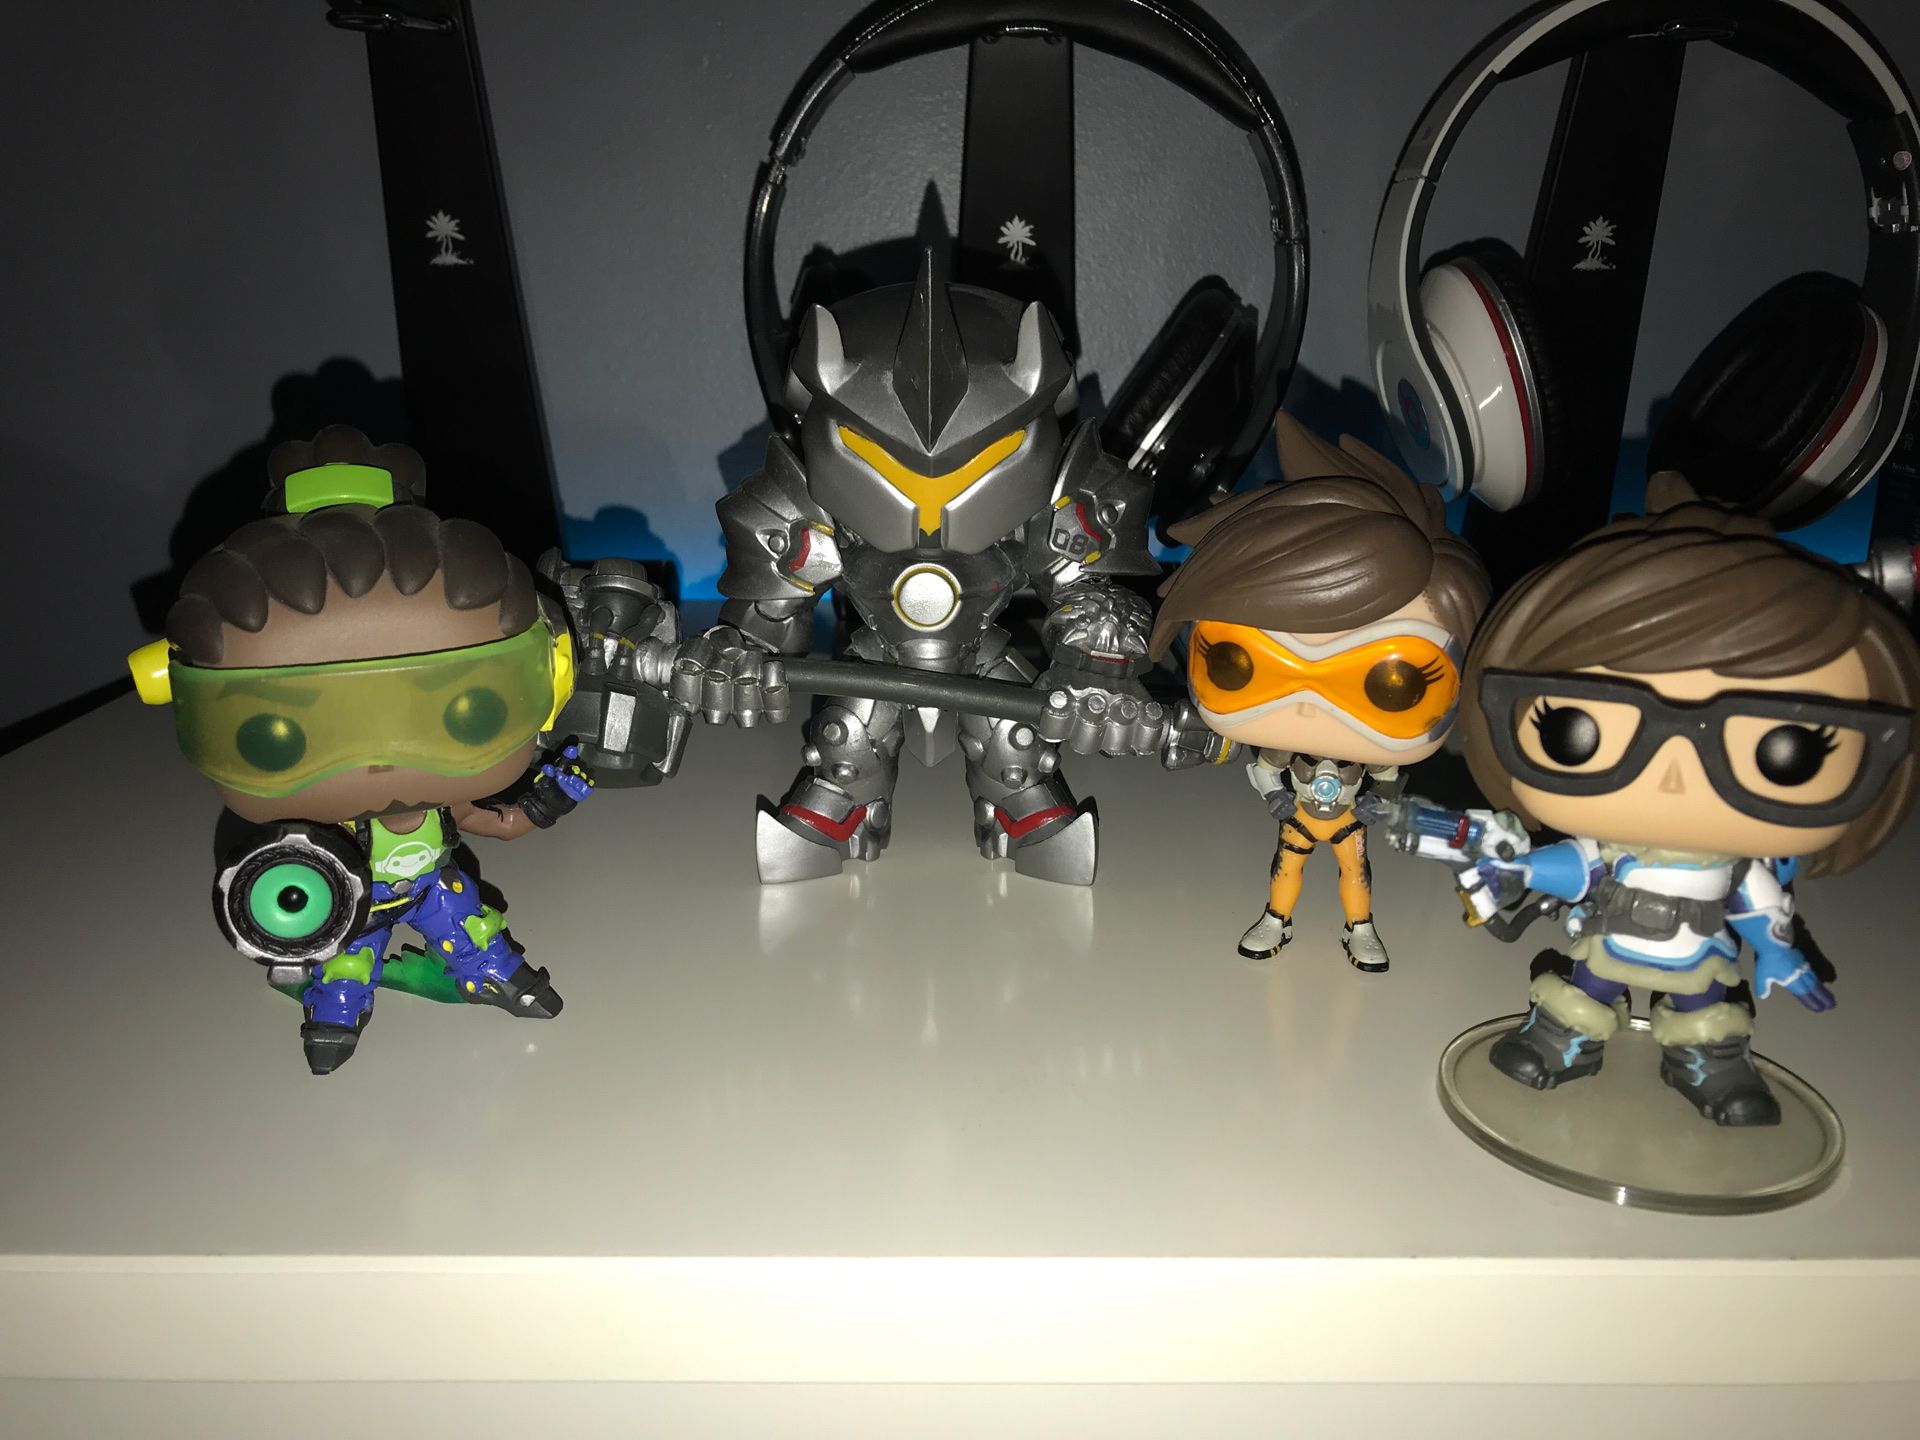 Overwatch Funko Pops. Lucio, Reinhardt, Tracer, and Mei. Sold together